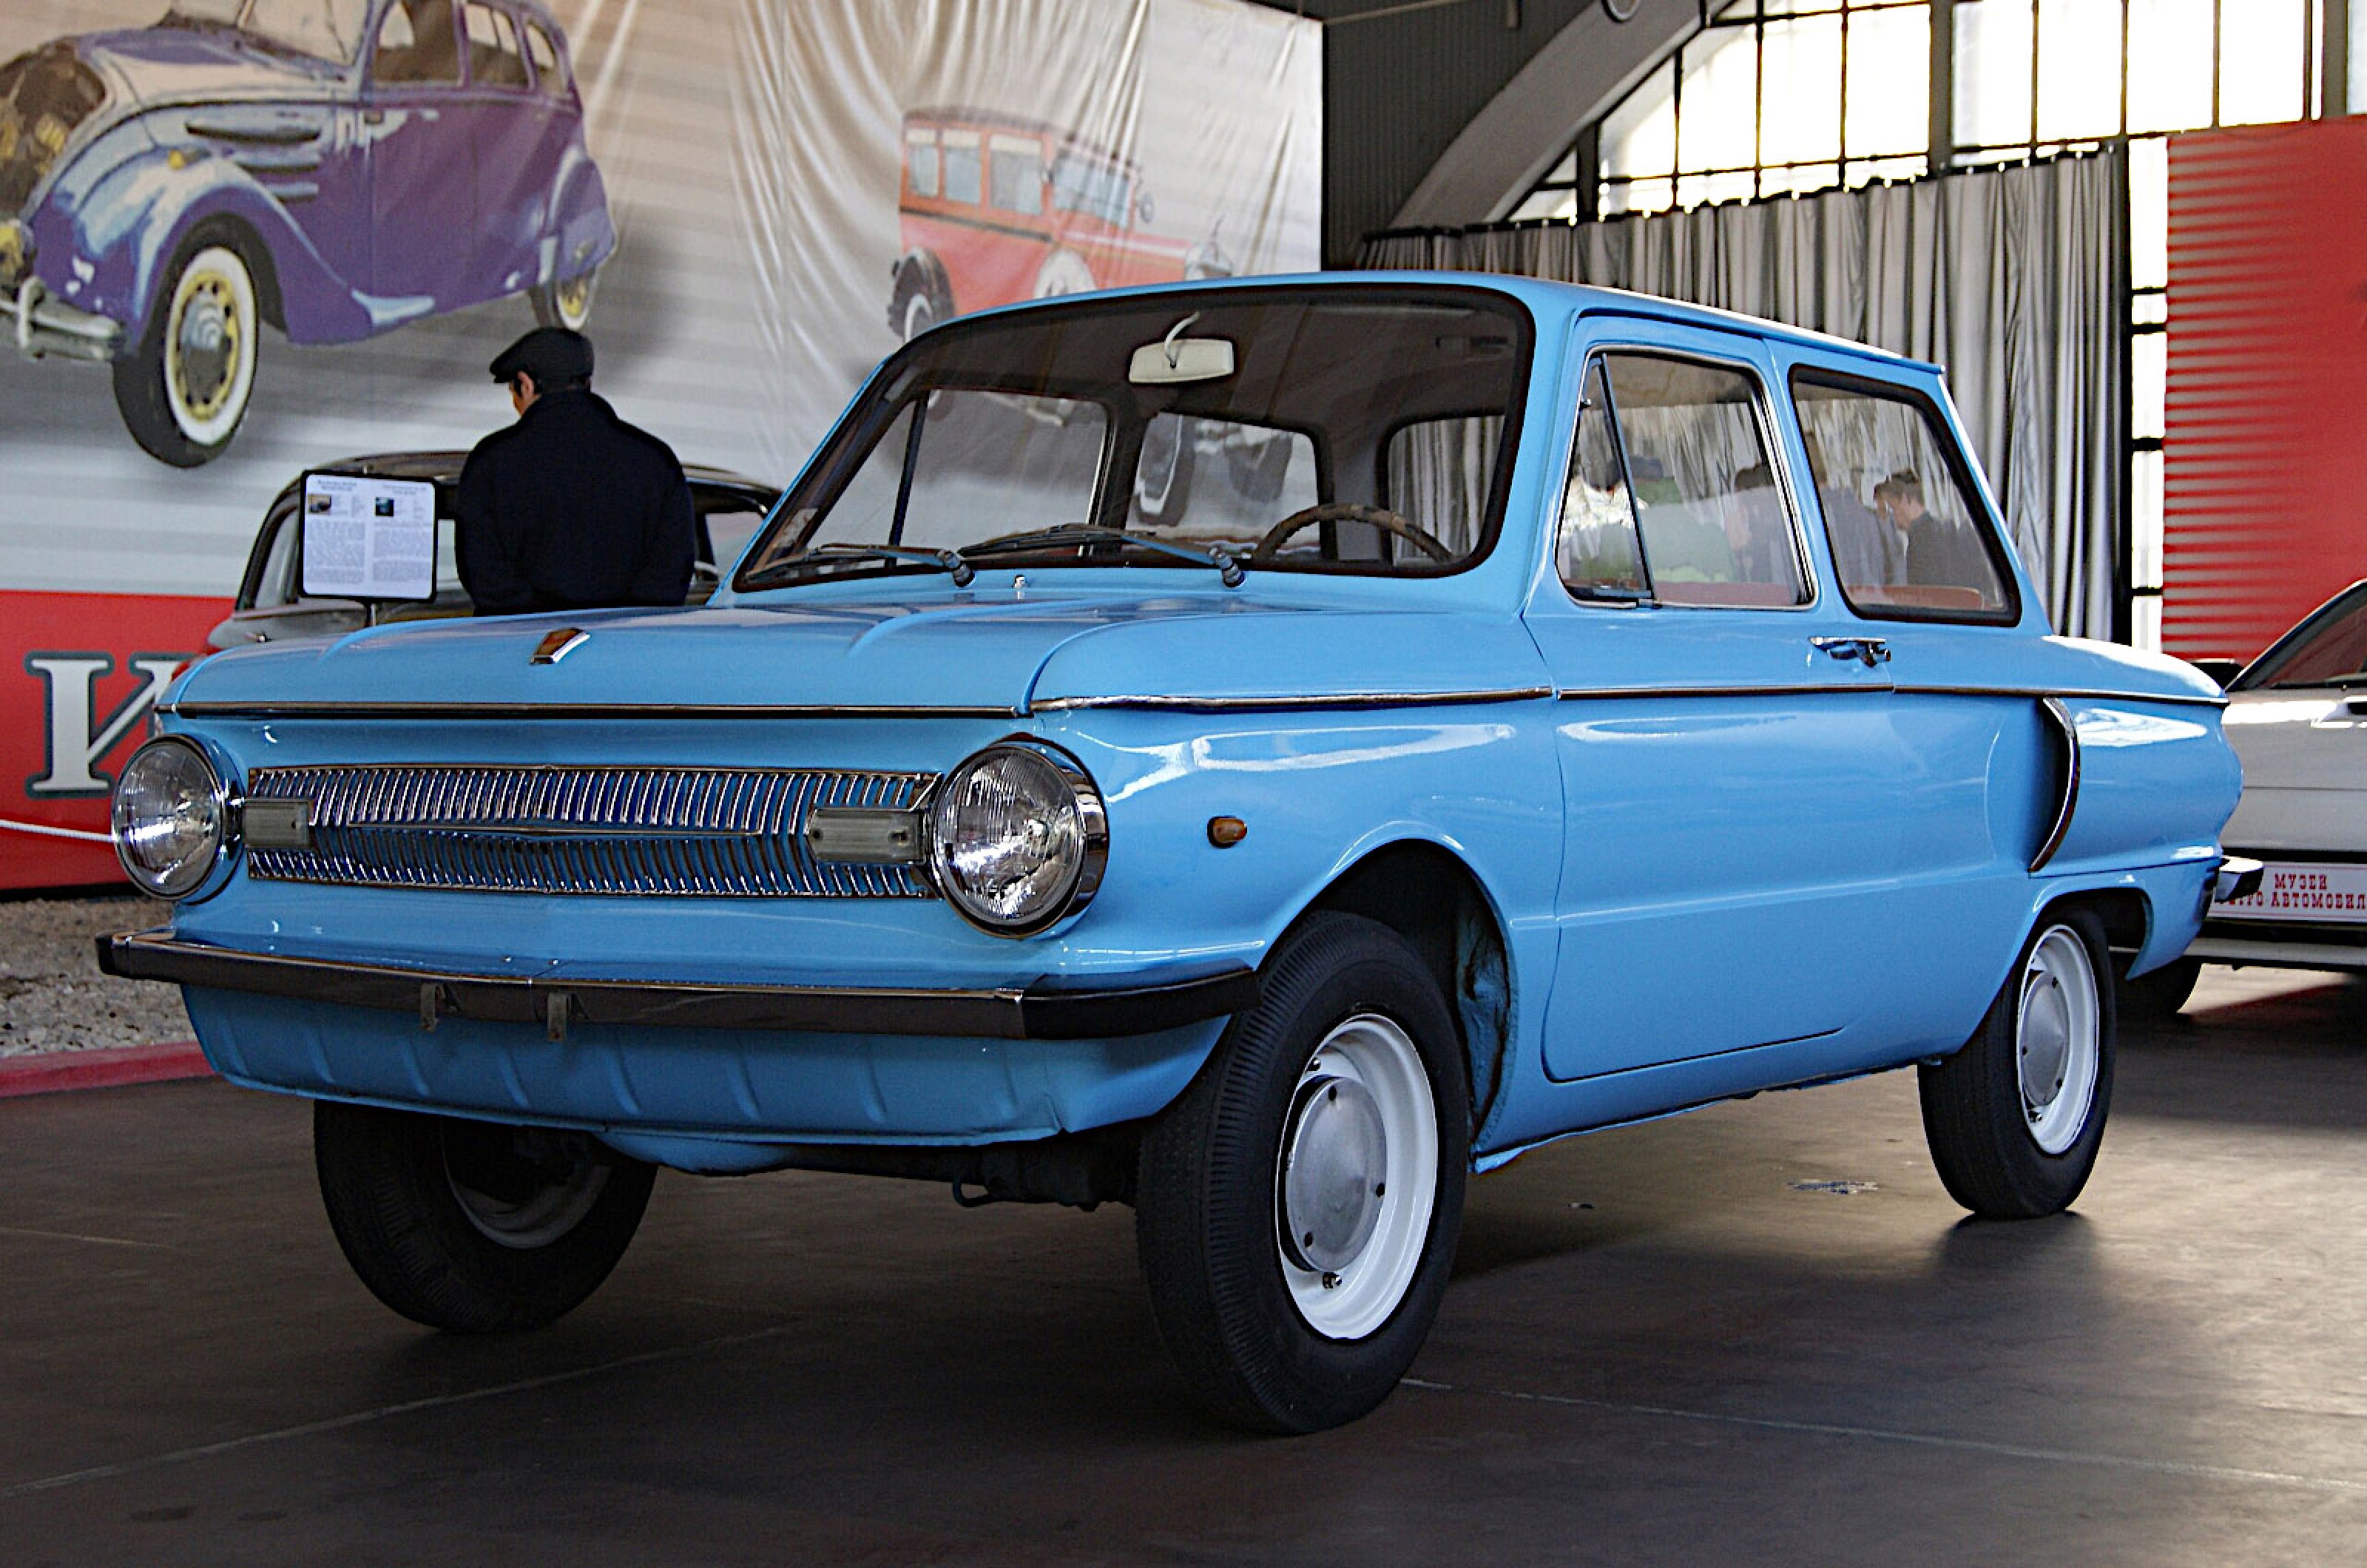 <p>The small rear-engined cars produced by ZAZ, based in what was then part of Russia but is now Ukraine, had individual model names but are known collectively as Zaporozhets.</p>  <p>The first of them bore a very strong resemblance to the Fiat 600, while the second had a similar visual connection with the NSU Prinz.</p>  <p>As previously discussed, the Prinz looked like it had been influenced by the Chevrolet Corvair.</p>  <p>ZAZ probably based the new car’s styling on the small German model rather than the large American one, but it seems reasonable to suggest that the Zaporozhets of this era would not have looked the way it did if there hadn’t been a Prinz, which would not have looked the way it did if there hadn’t been a Corvair.</p>